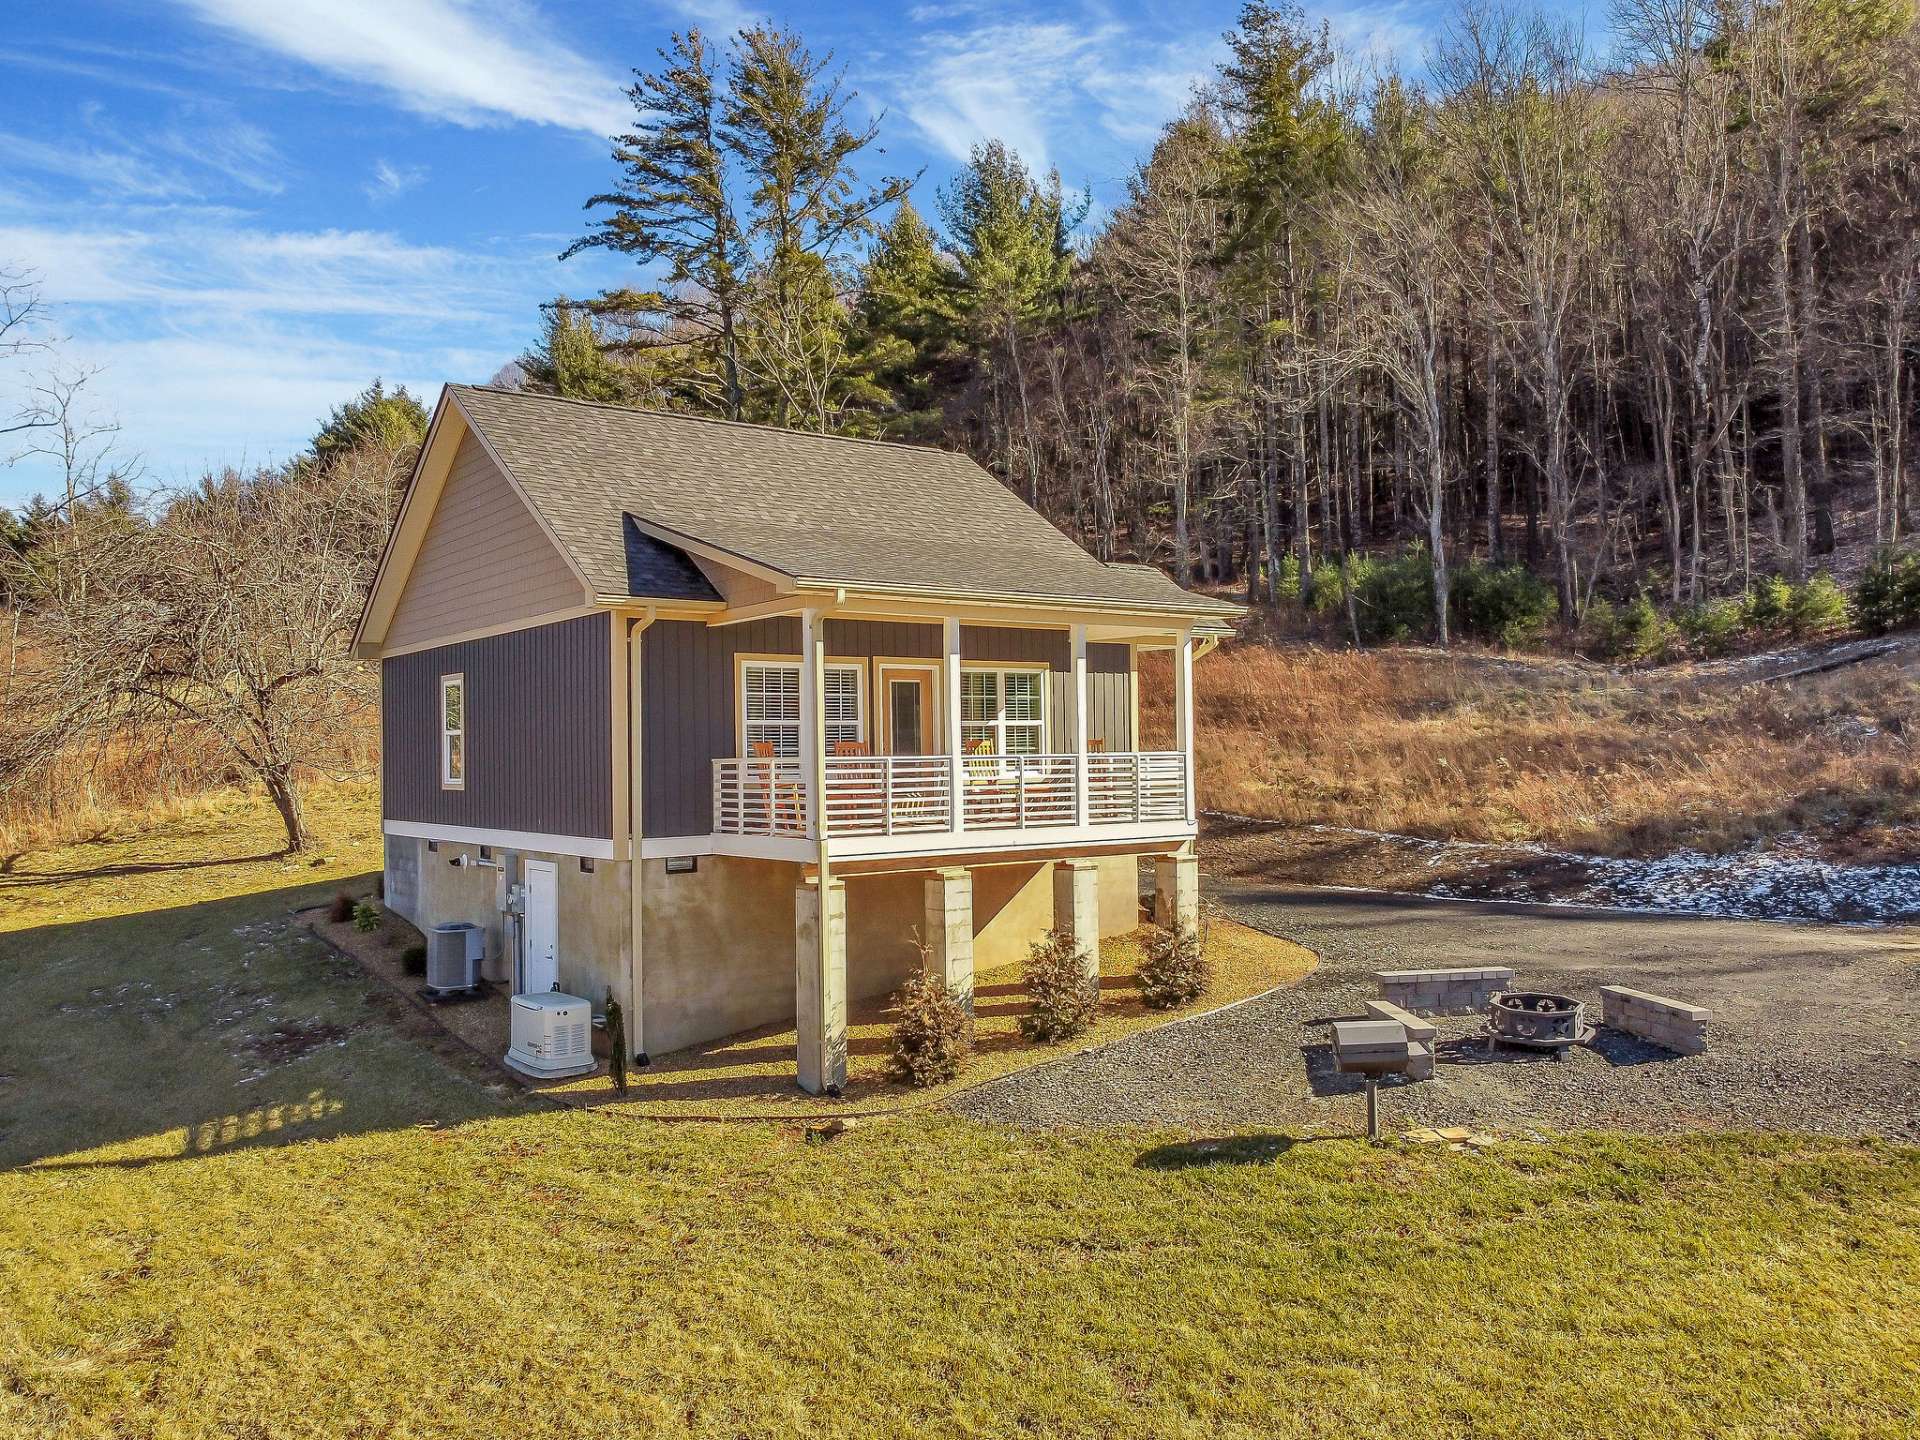 413 Rugged Ridge Rd, West Jefferson is the largest tiny home with 914 square feet.